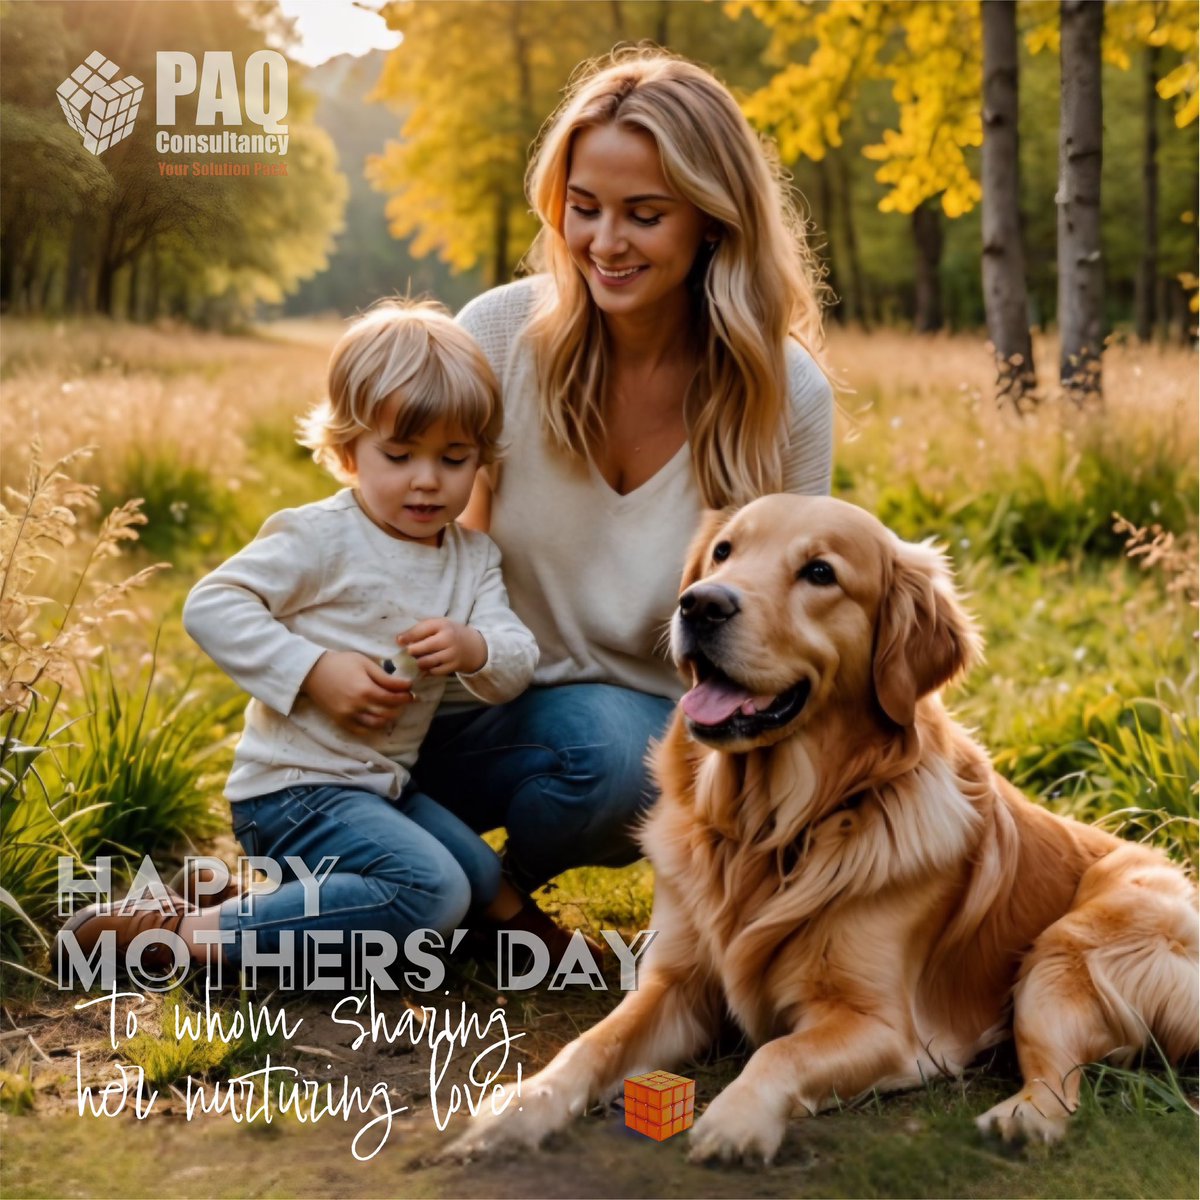 Happy Mother's Day to all the incredible moms and to those who share the nurturing love of a mom with every living being, from furry friends to feathered companions! Your compassion knows no bounds, enriching the lives of all creatures with care and affection.

#MothersDay